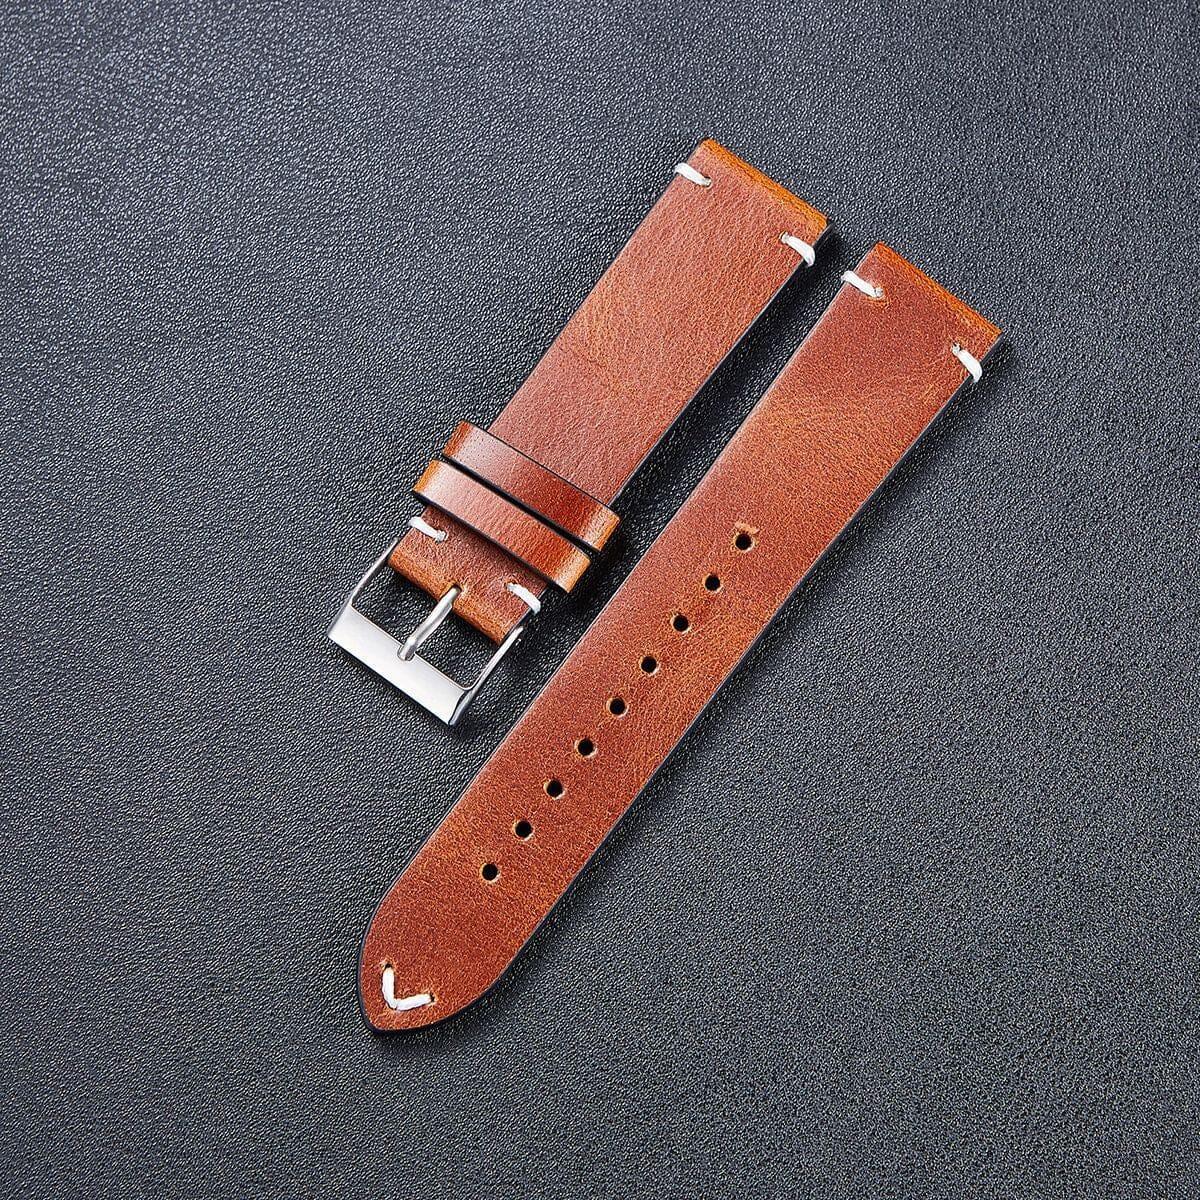 Vintage Oiled Leather Watch Straps Compatible with the Huawei Honor S1